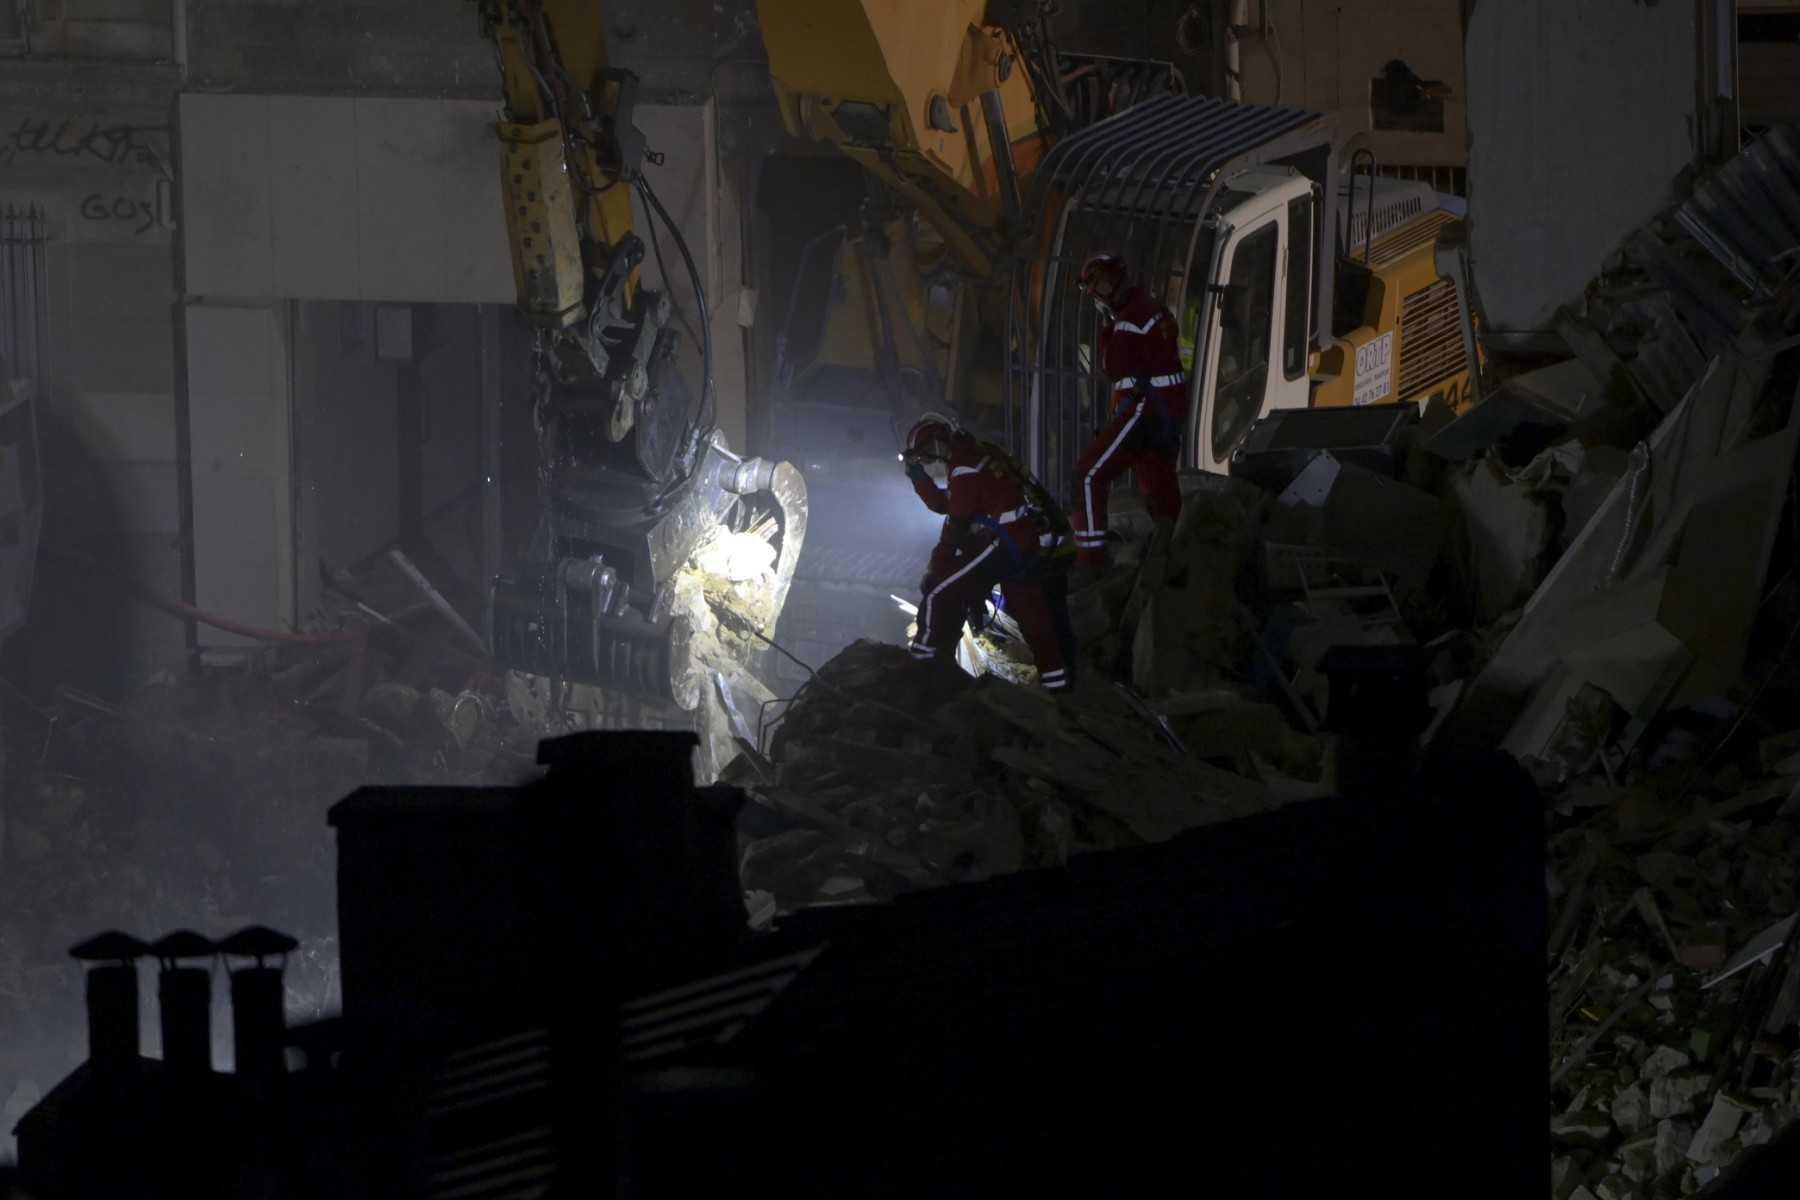 Emergency services workers look on as an excavator moves rubble at 'rue Tivoli' after a building collapsed in the street, in Marseille, southern France, on April 9. Photo: AFP 